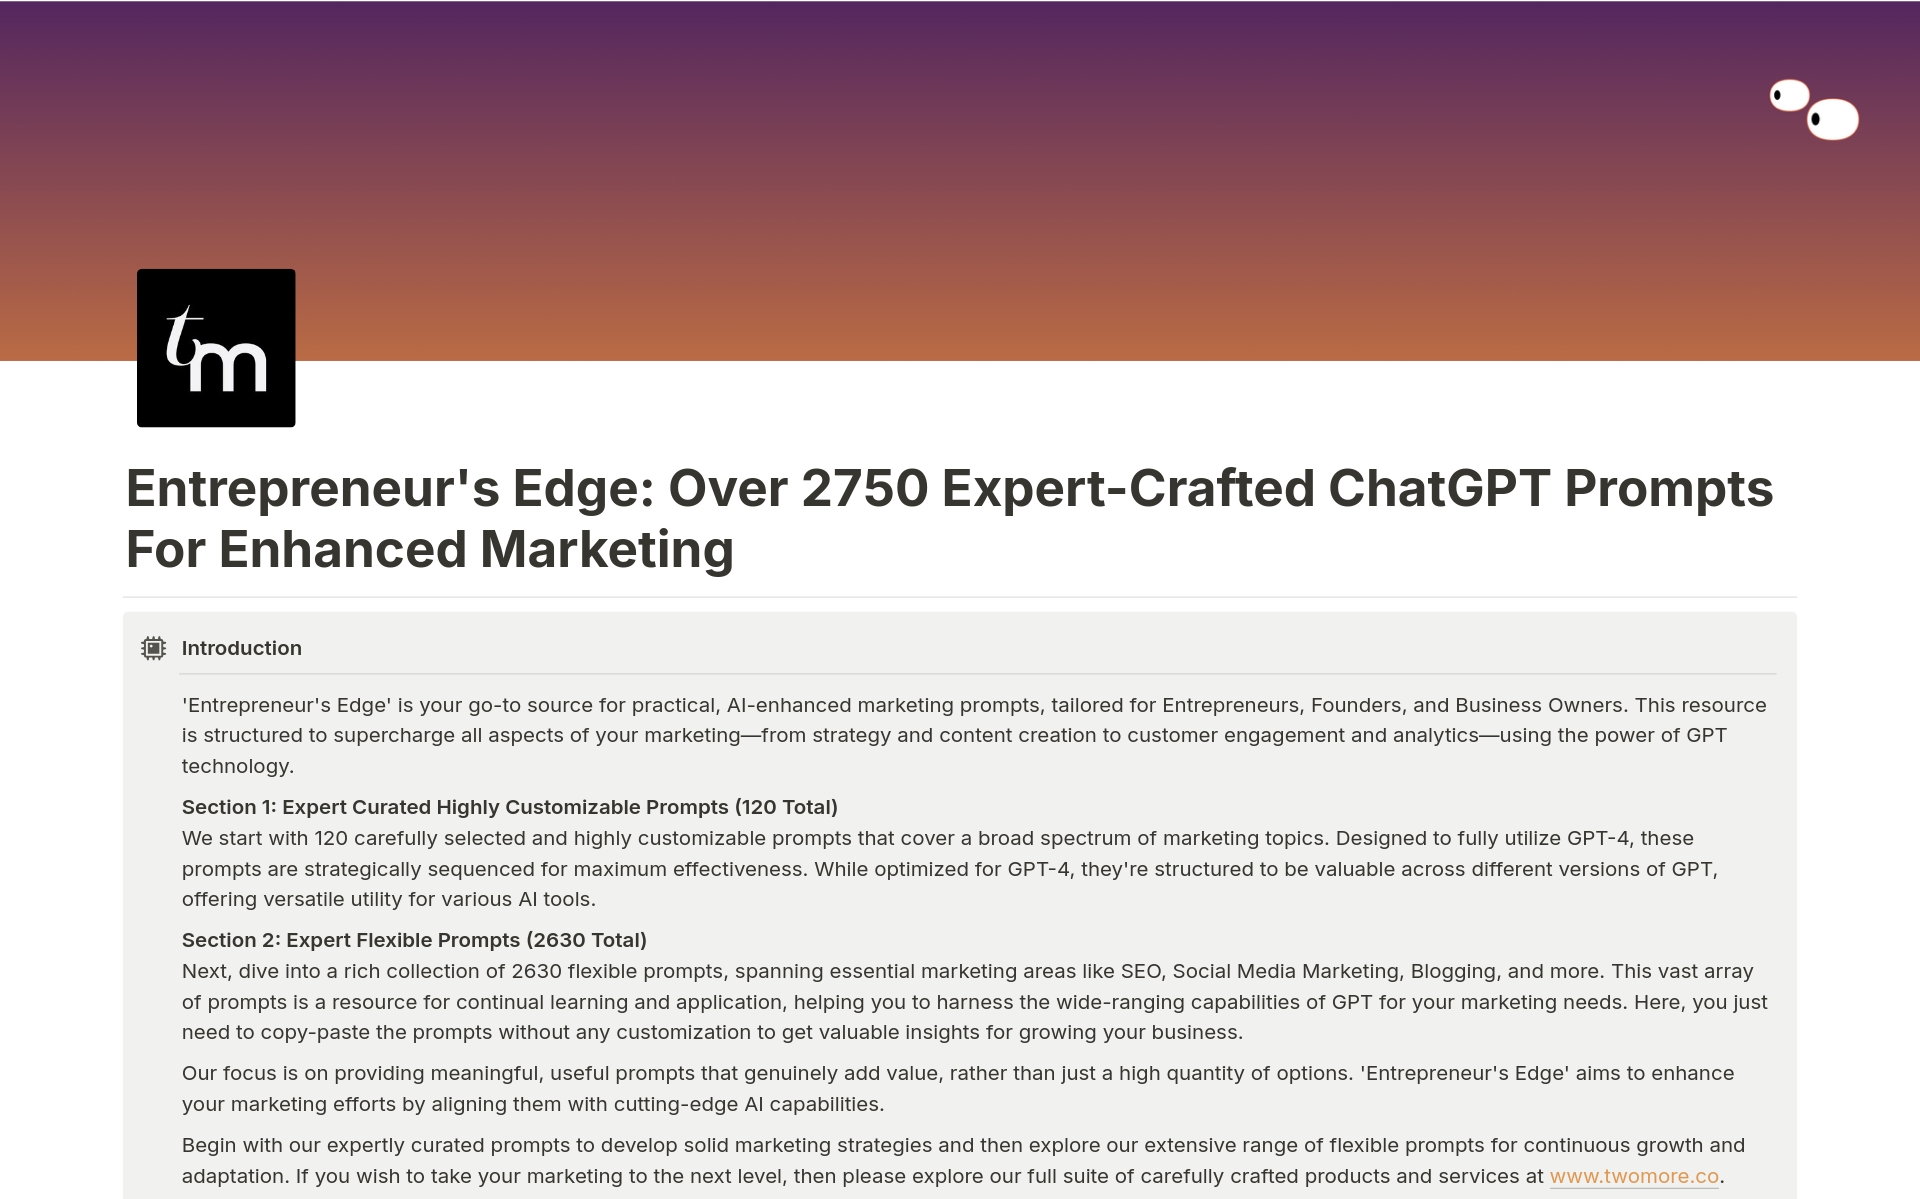 This Comprehensive Editable Notion document contains over 2750 meticulously crafted chatGPT prompts for enhancing your marketing efforts. Crafted specifically for Entrepreneurs, Founders, and Business Owners, this resource is your secret weapon to leverage the latest AI Tech.